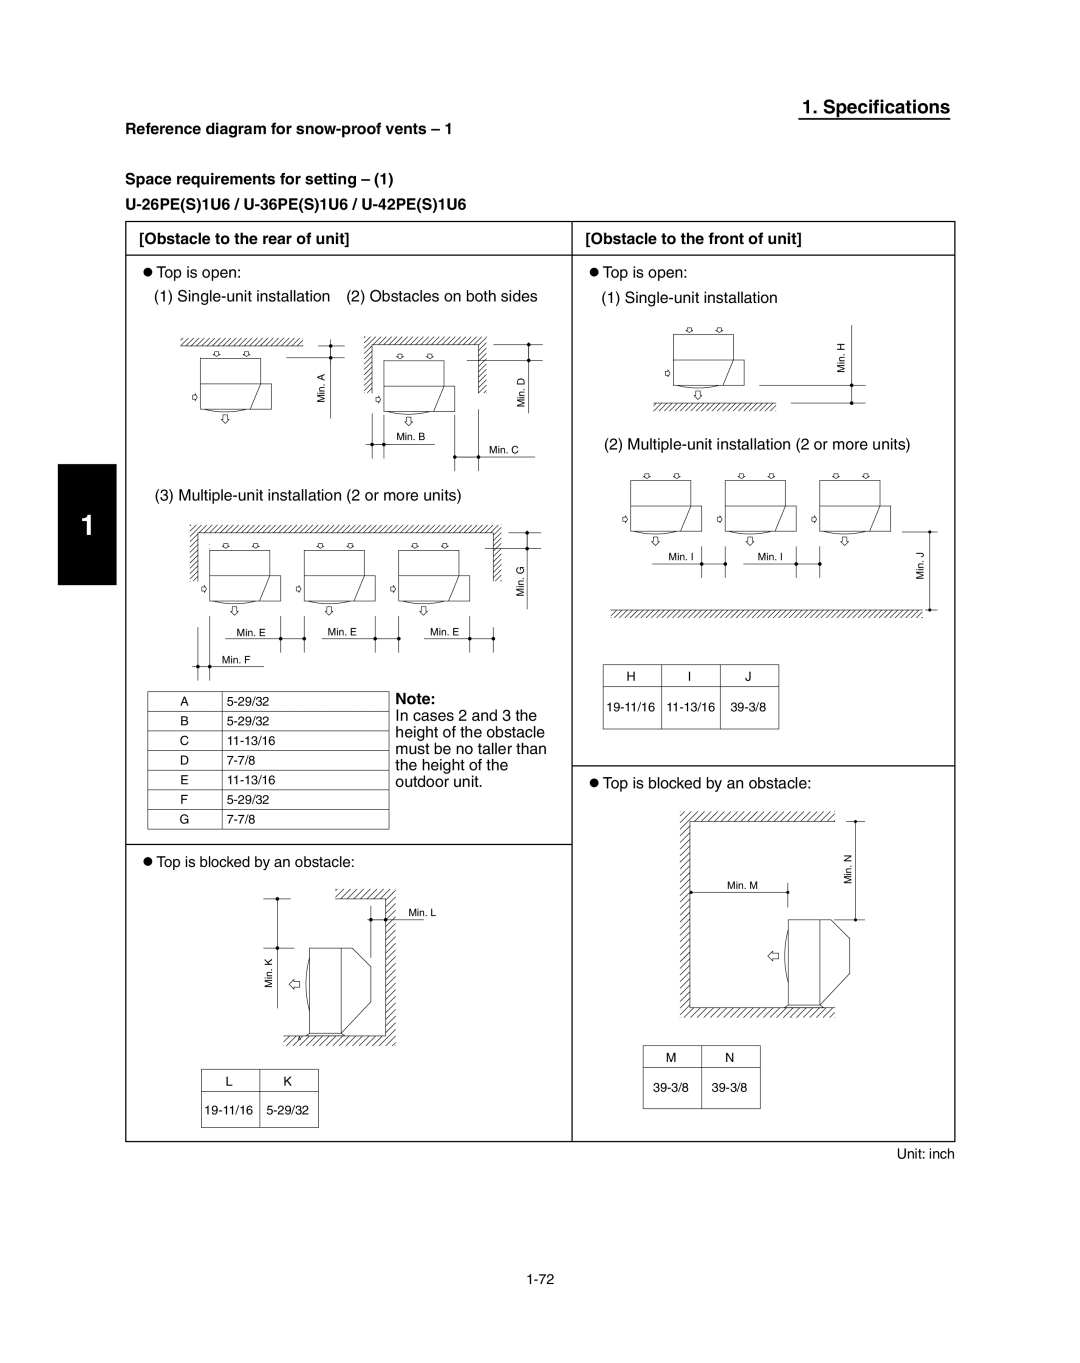 Panasonic R410A service manual Specifications, Reference diagram for snow-proofvents, Space requirements for setting 